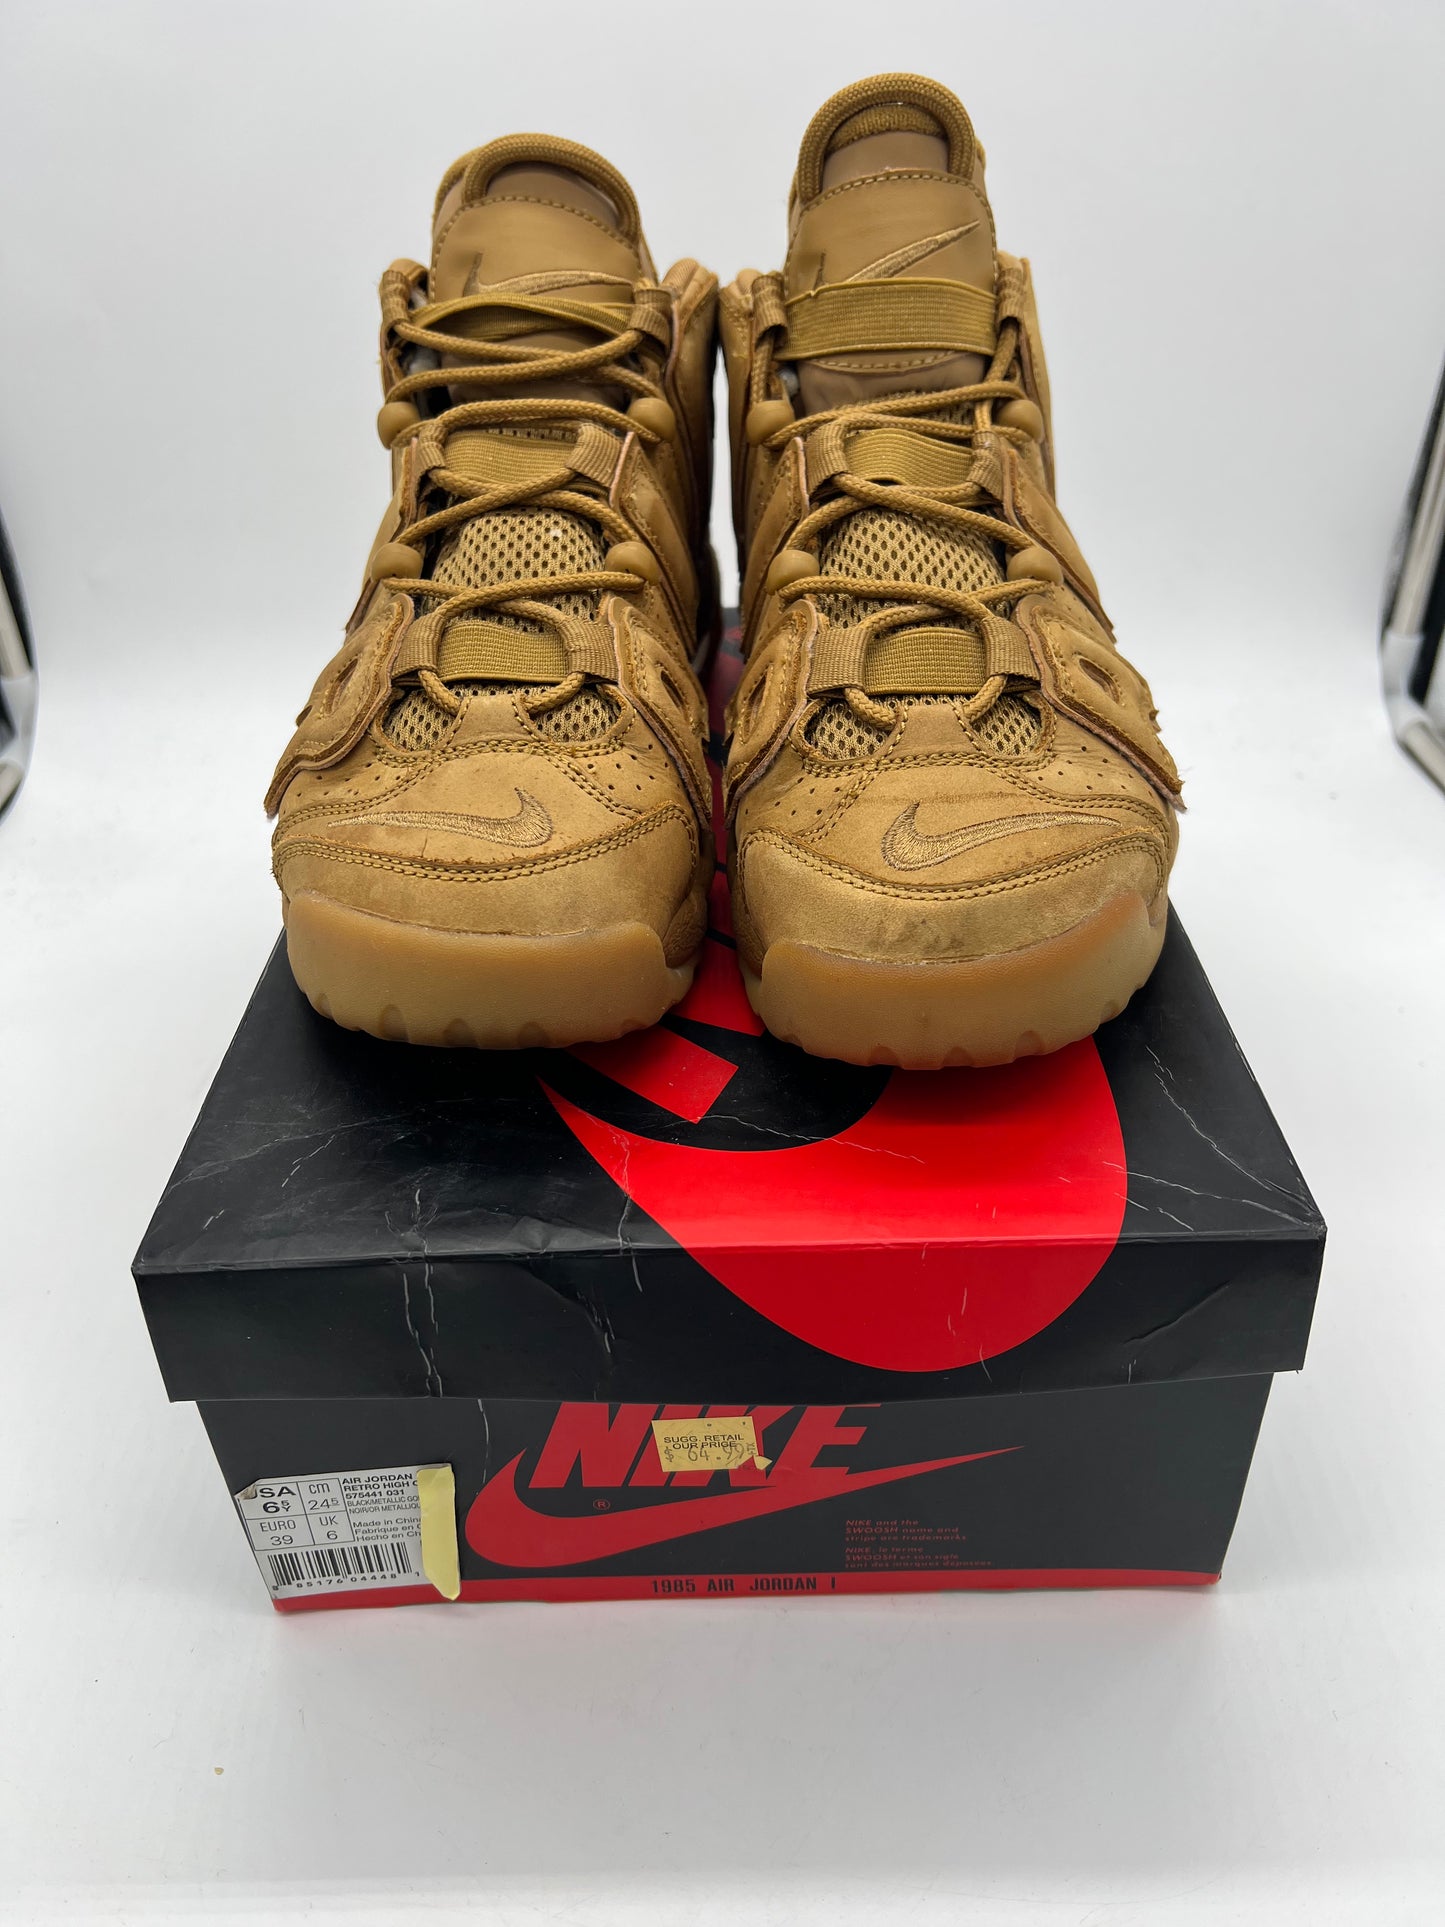 Used Nike More Uptempo Gs 'Flax' Sz 6.5y